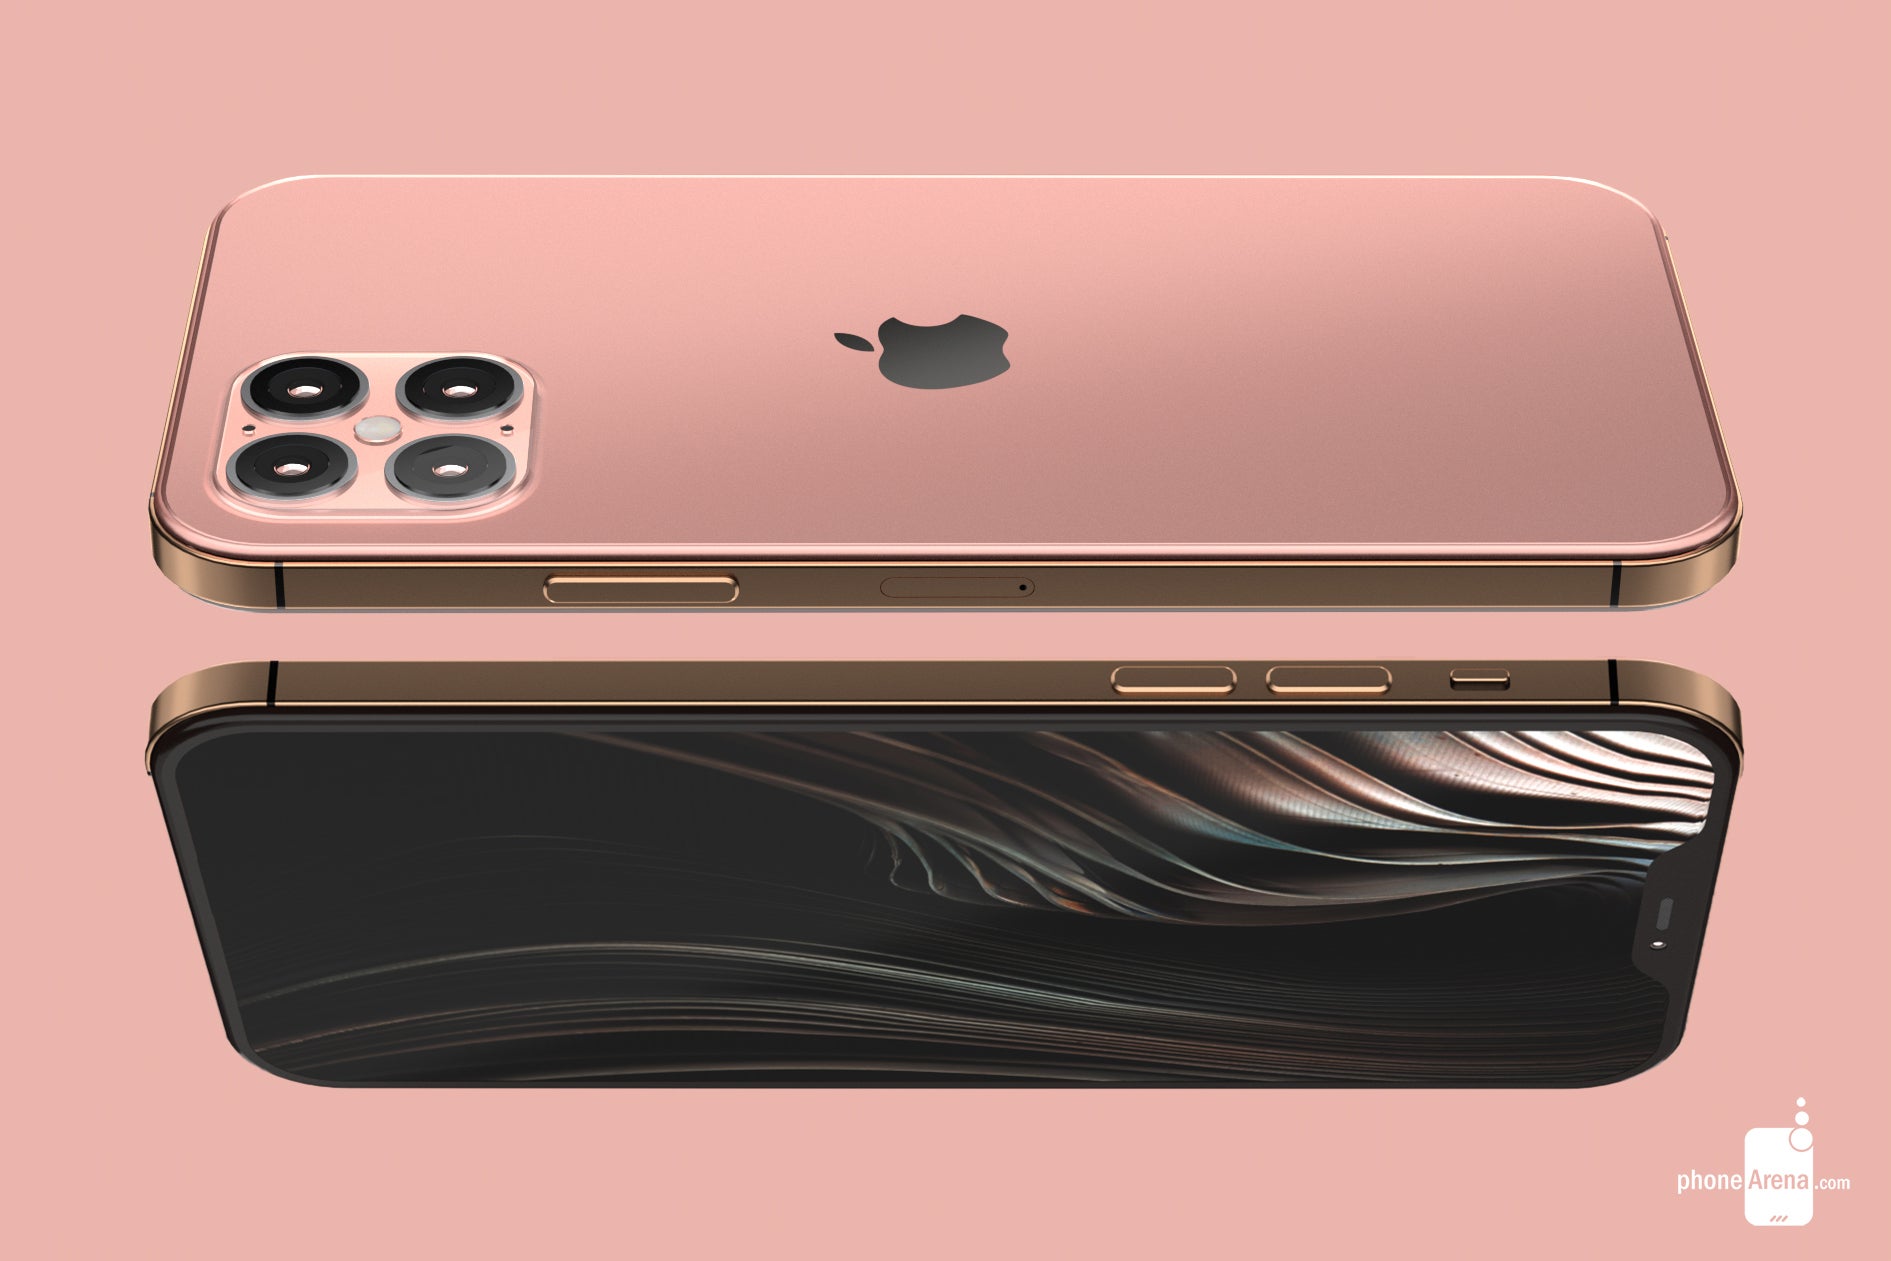 iPhone 12 Pro concept render - Apple's 2020 iPhones will be more expensive, but not by much